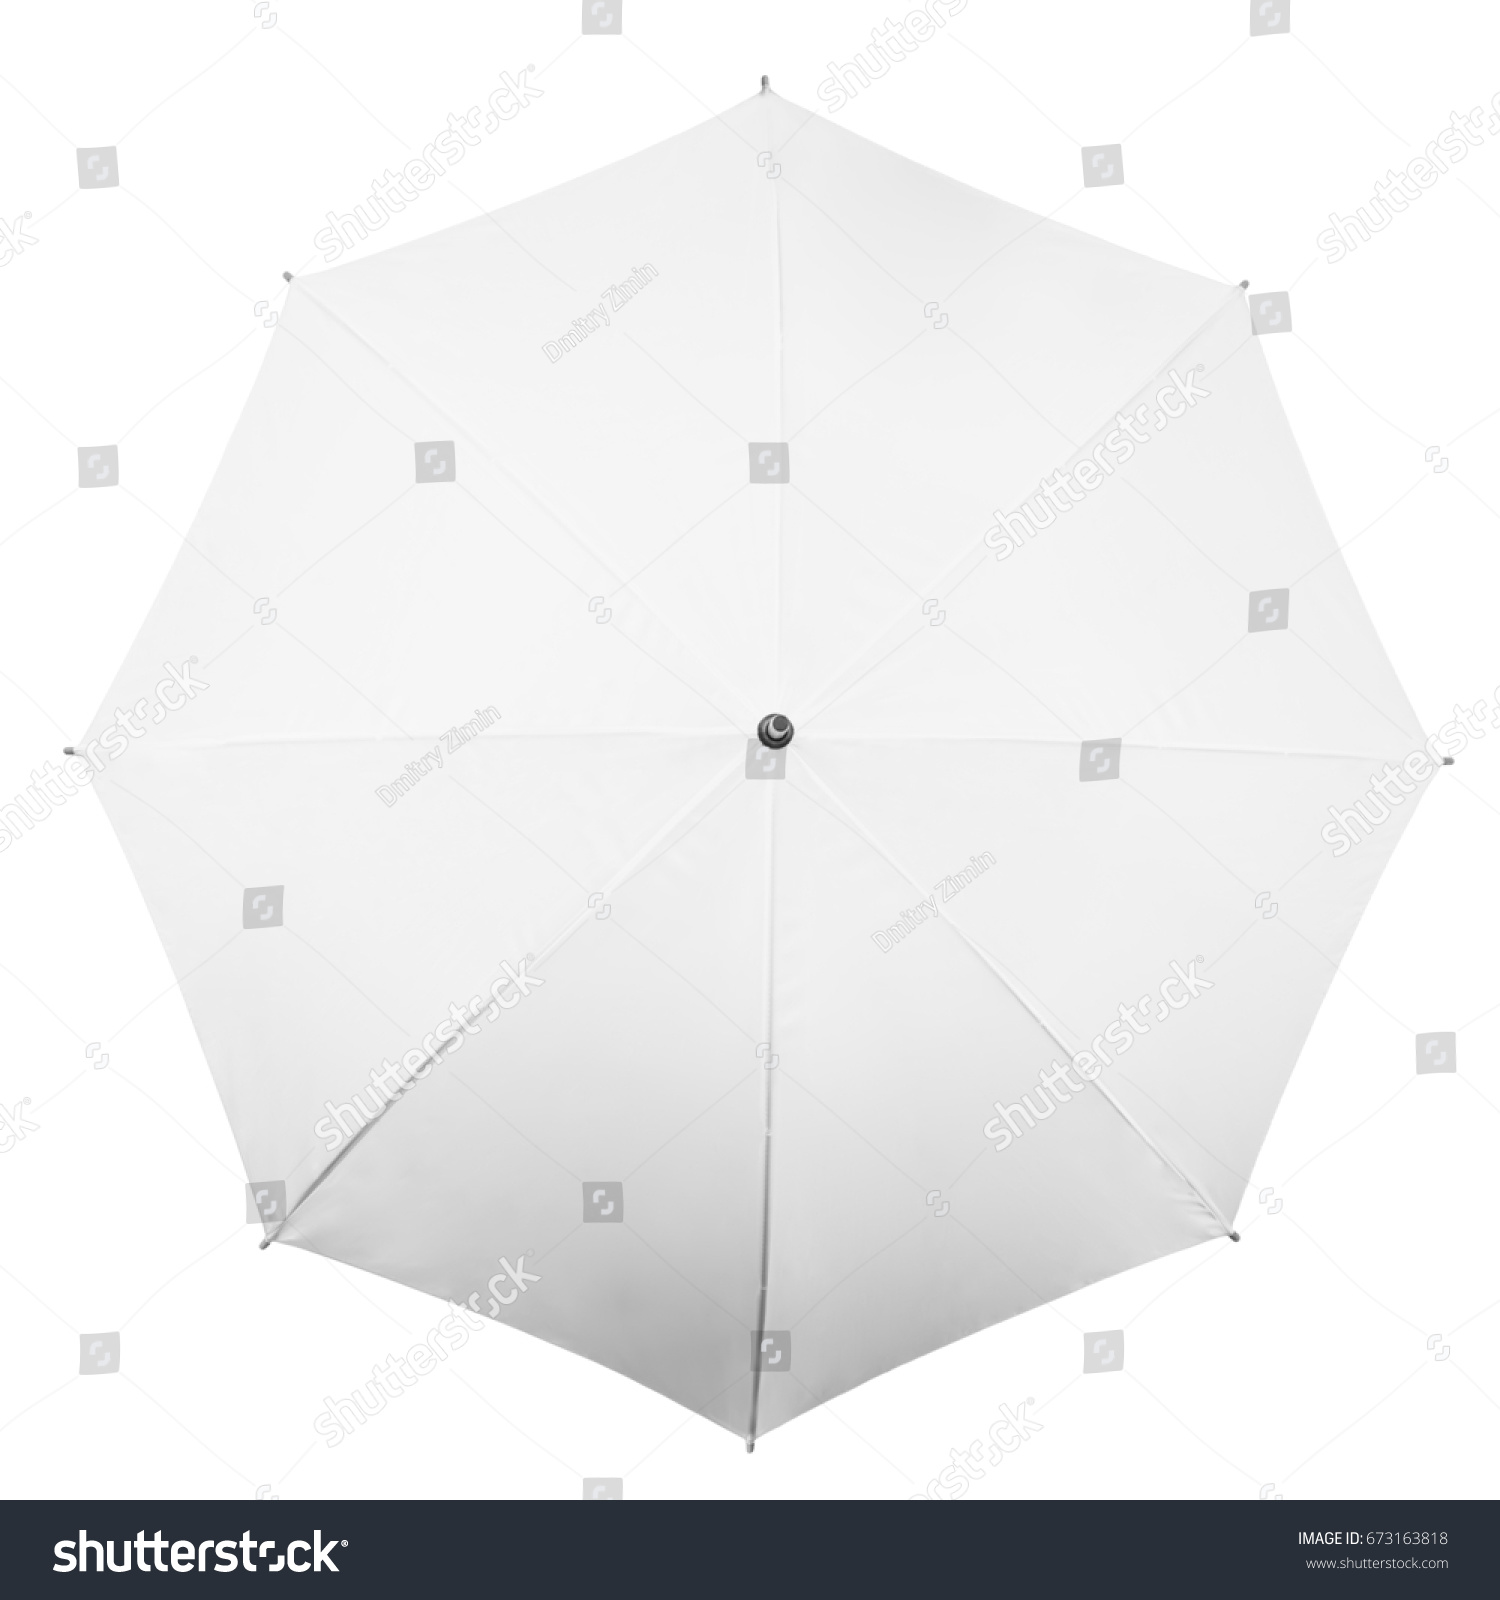 White umbrella isolated on white background. Top view #673163818